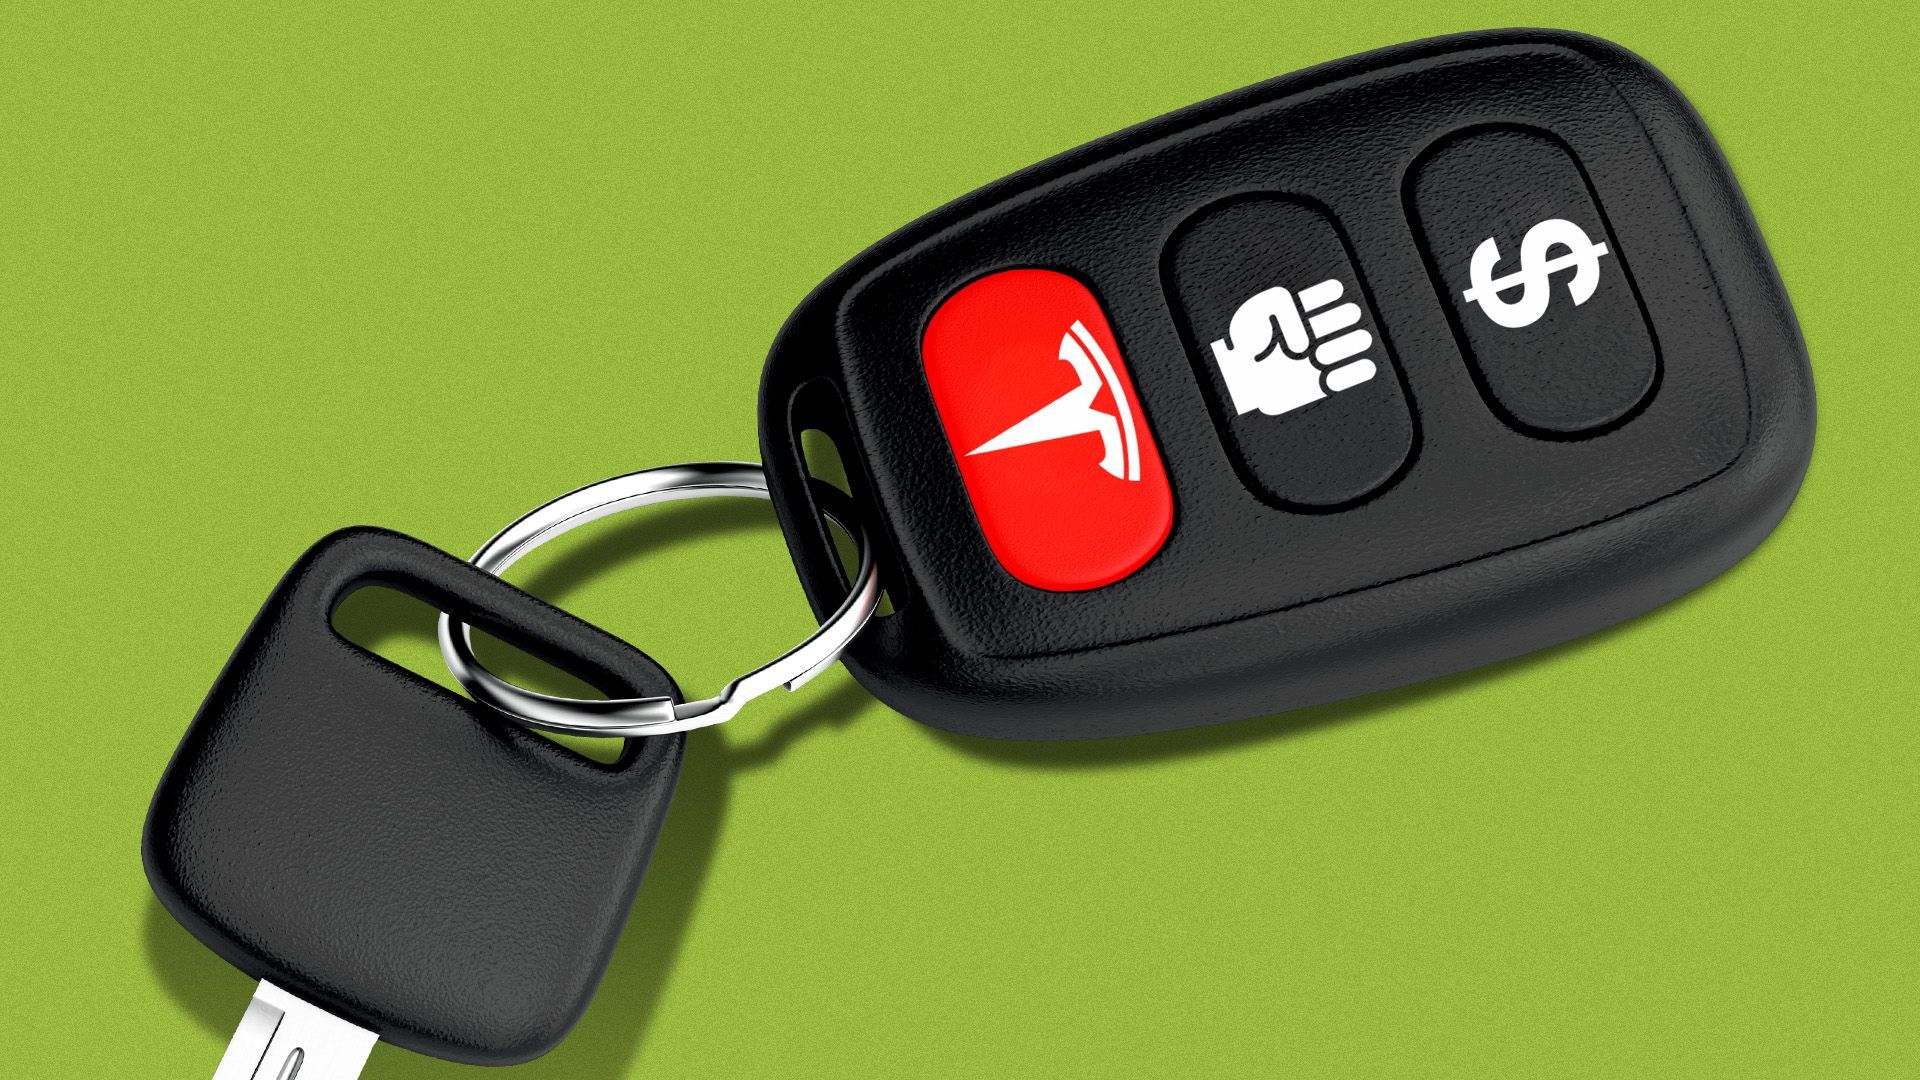 Illustration of a set of electric car keys with buttons featuring a Tesla symbol, a fist, and a dollar sign